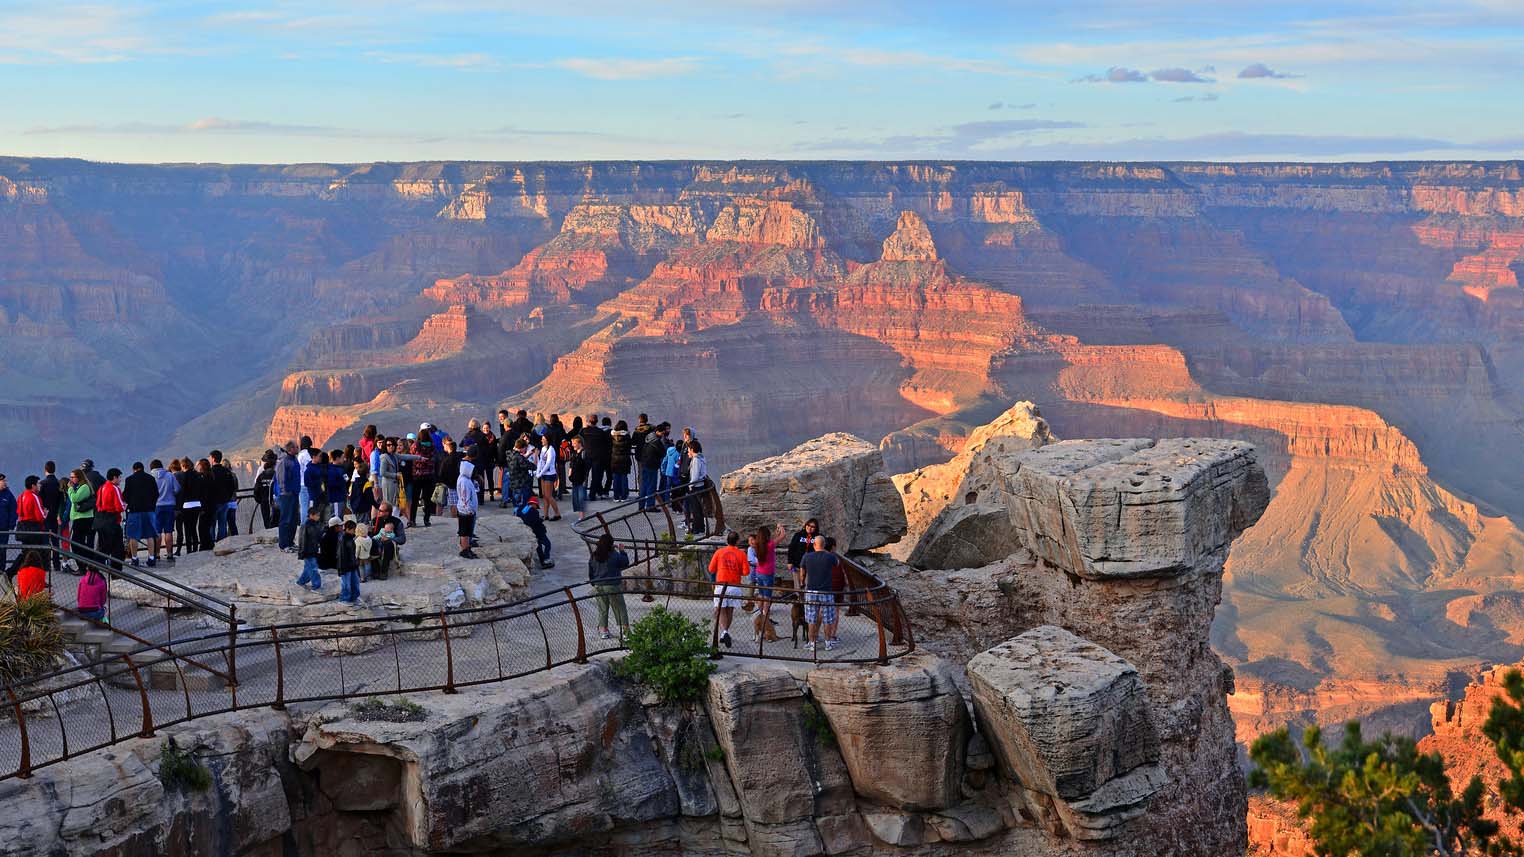 Can you go inside the Grand Canyon?